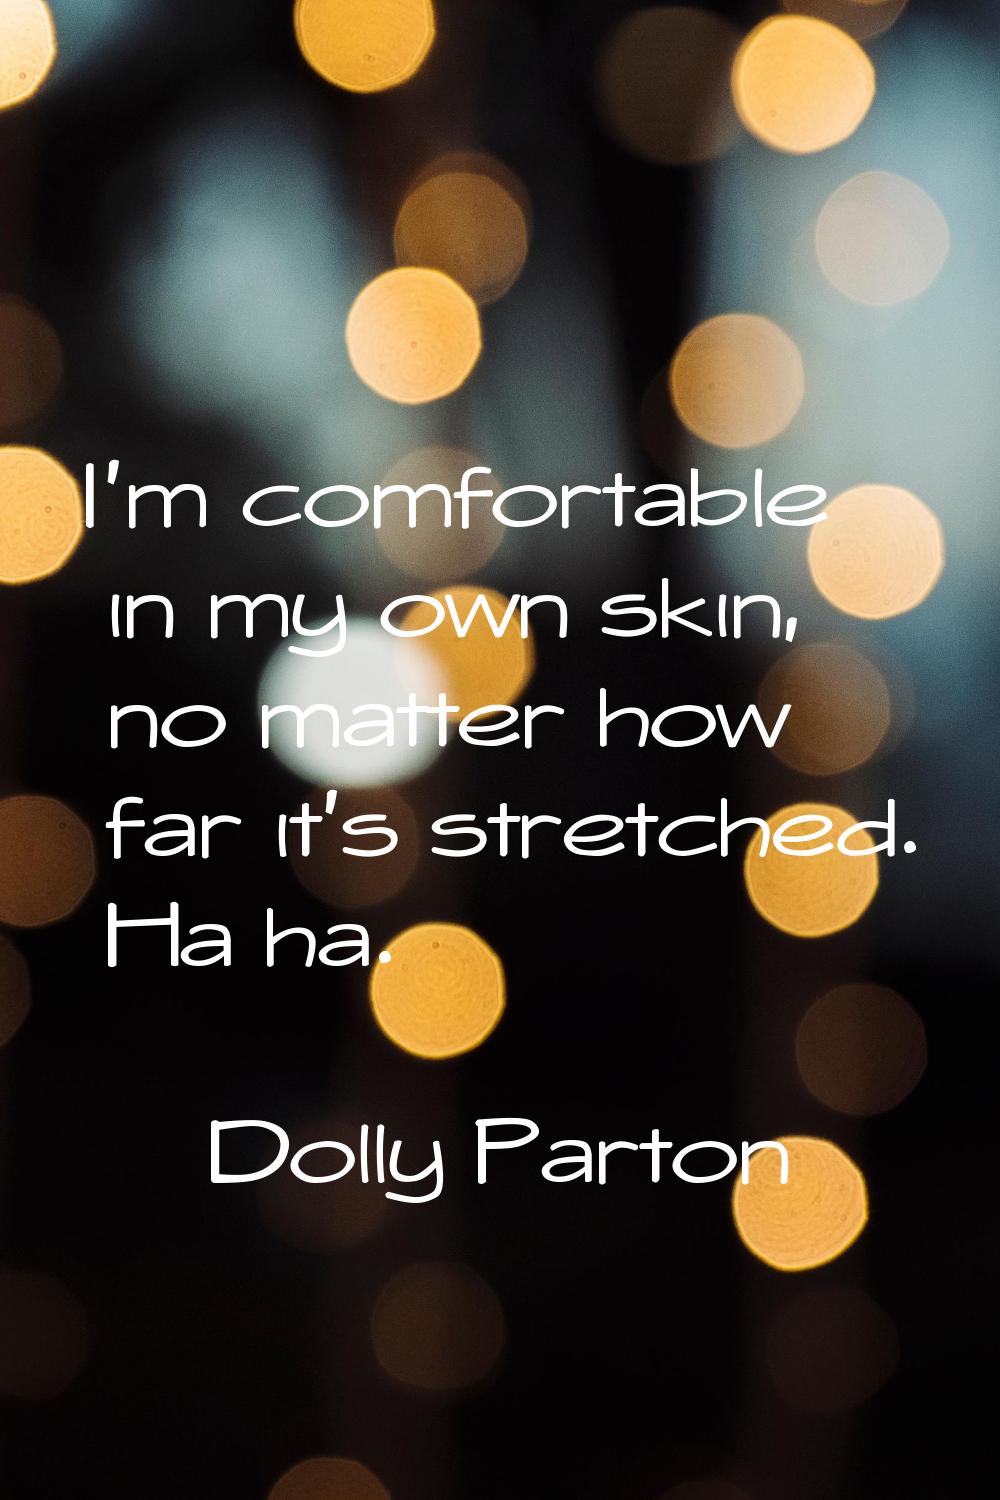 I'm comfortable in my own skin, no matter how far it's stretched. Ha ha.